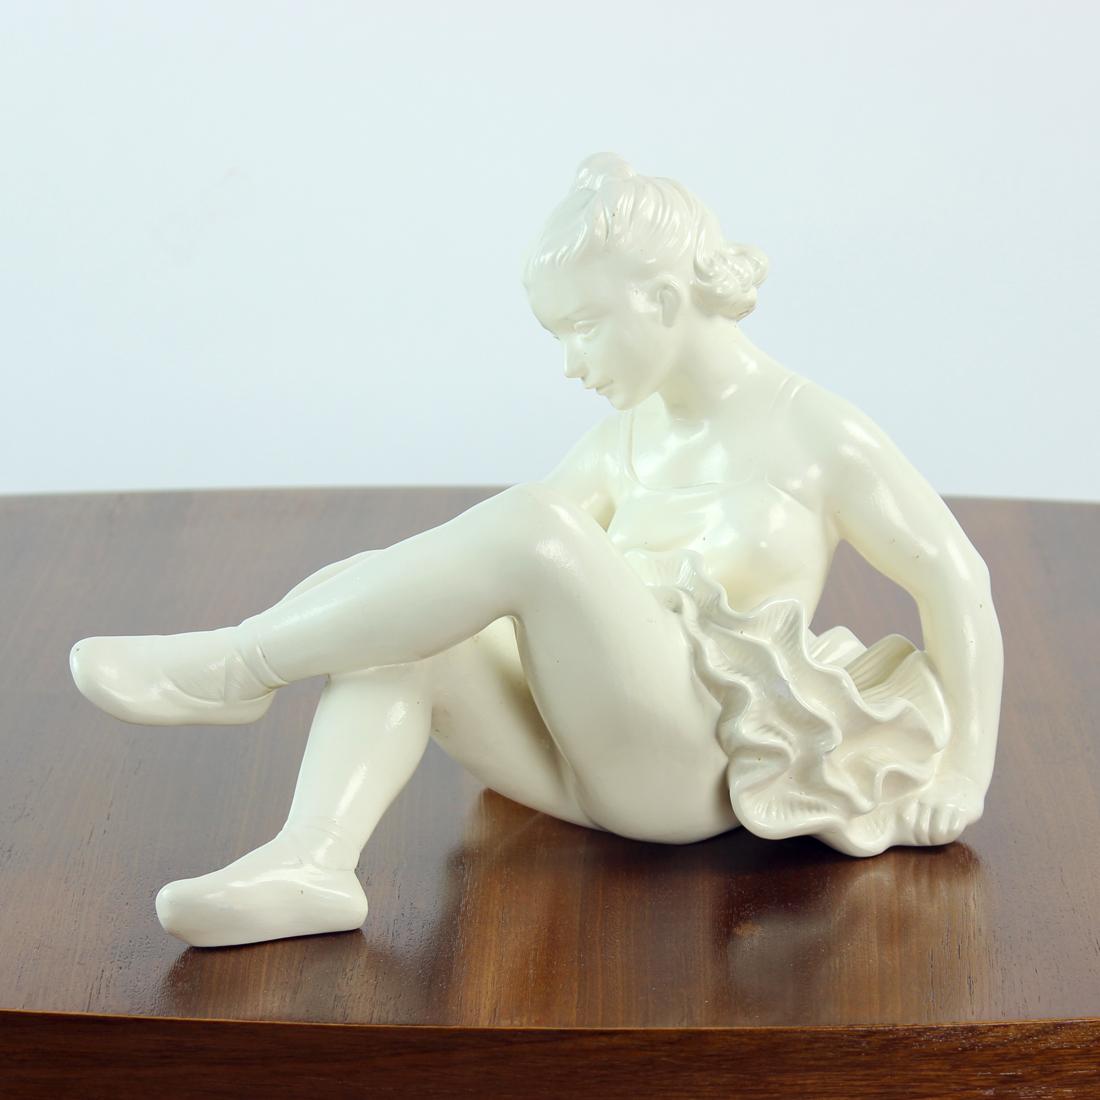 Beautiful vintage statue of a sitting ballet dancer. Produced in 1966 by Jihokera company in Czechoslovakia. The statue is made of glazed plaster. The color is cream white. The statue shows beautiful details in the dress and expression of the young